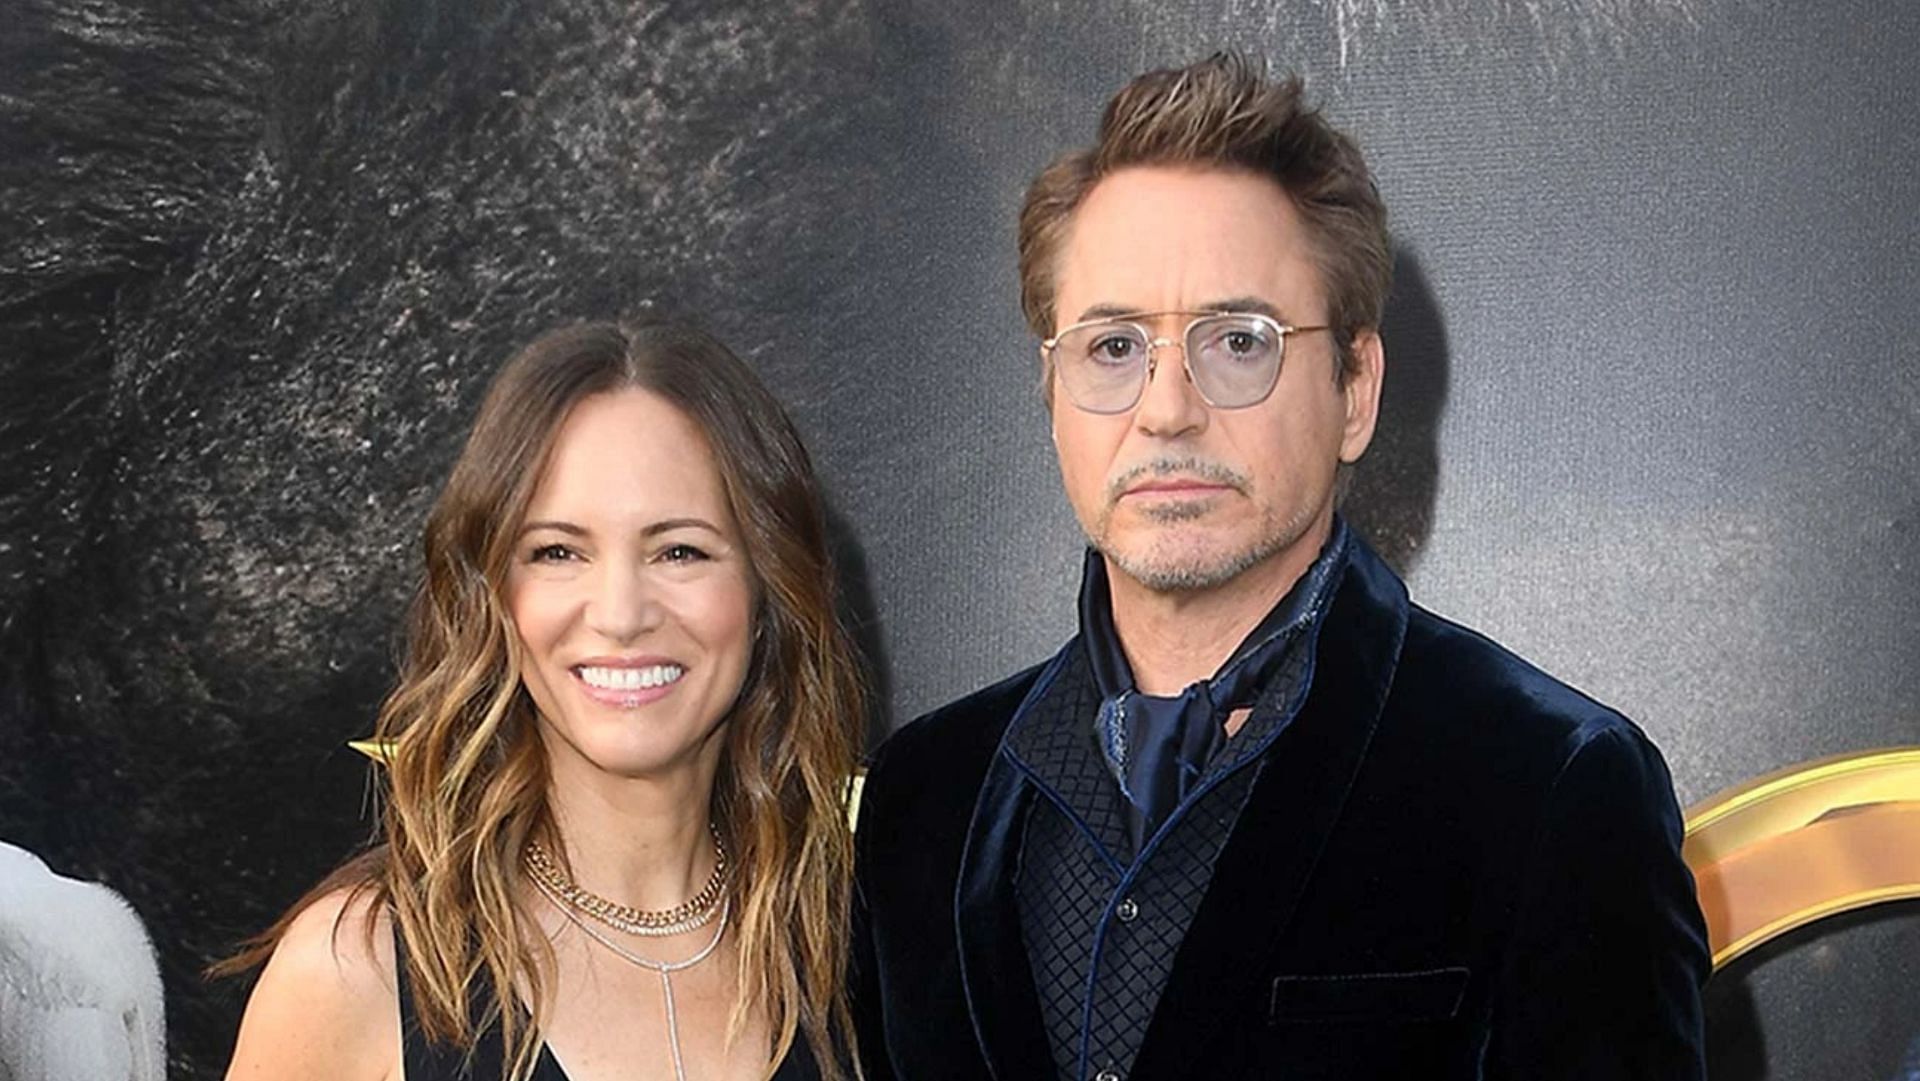 Robert Downey Jr and Susan tied the knot in 2005. (Image via Steve Granitz/Getty Images)